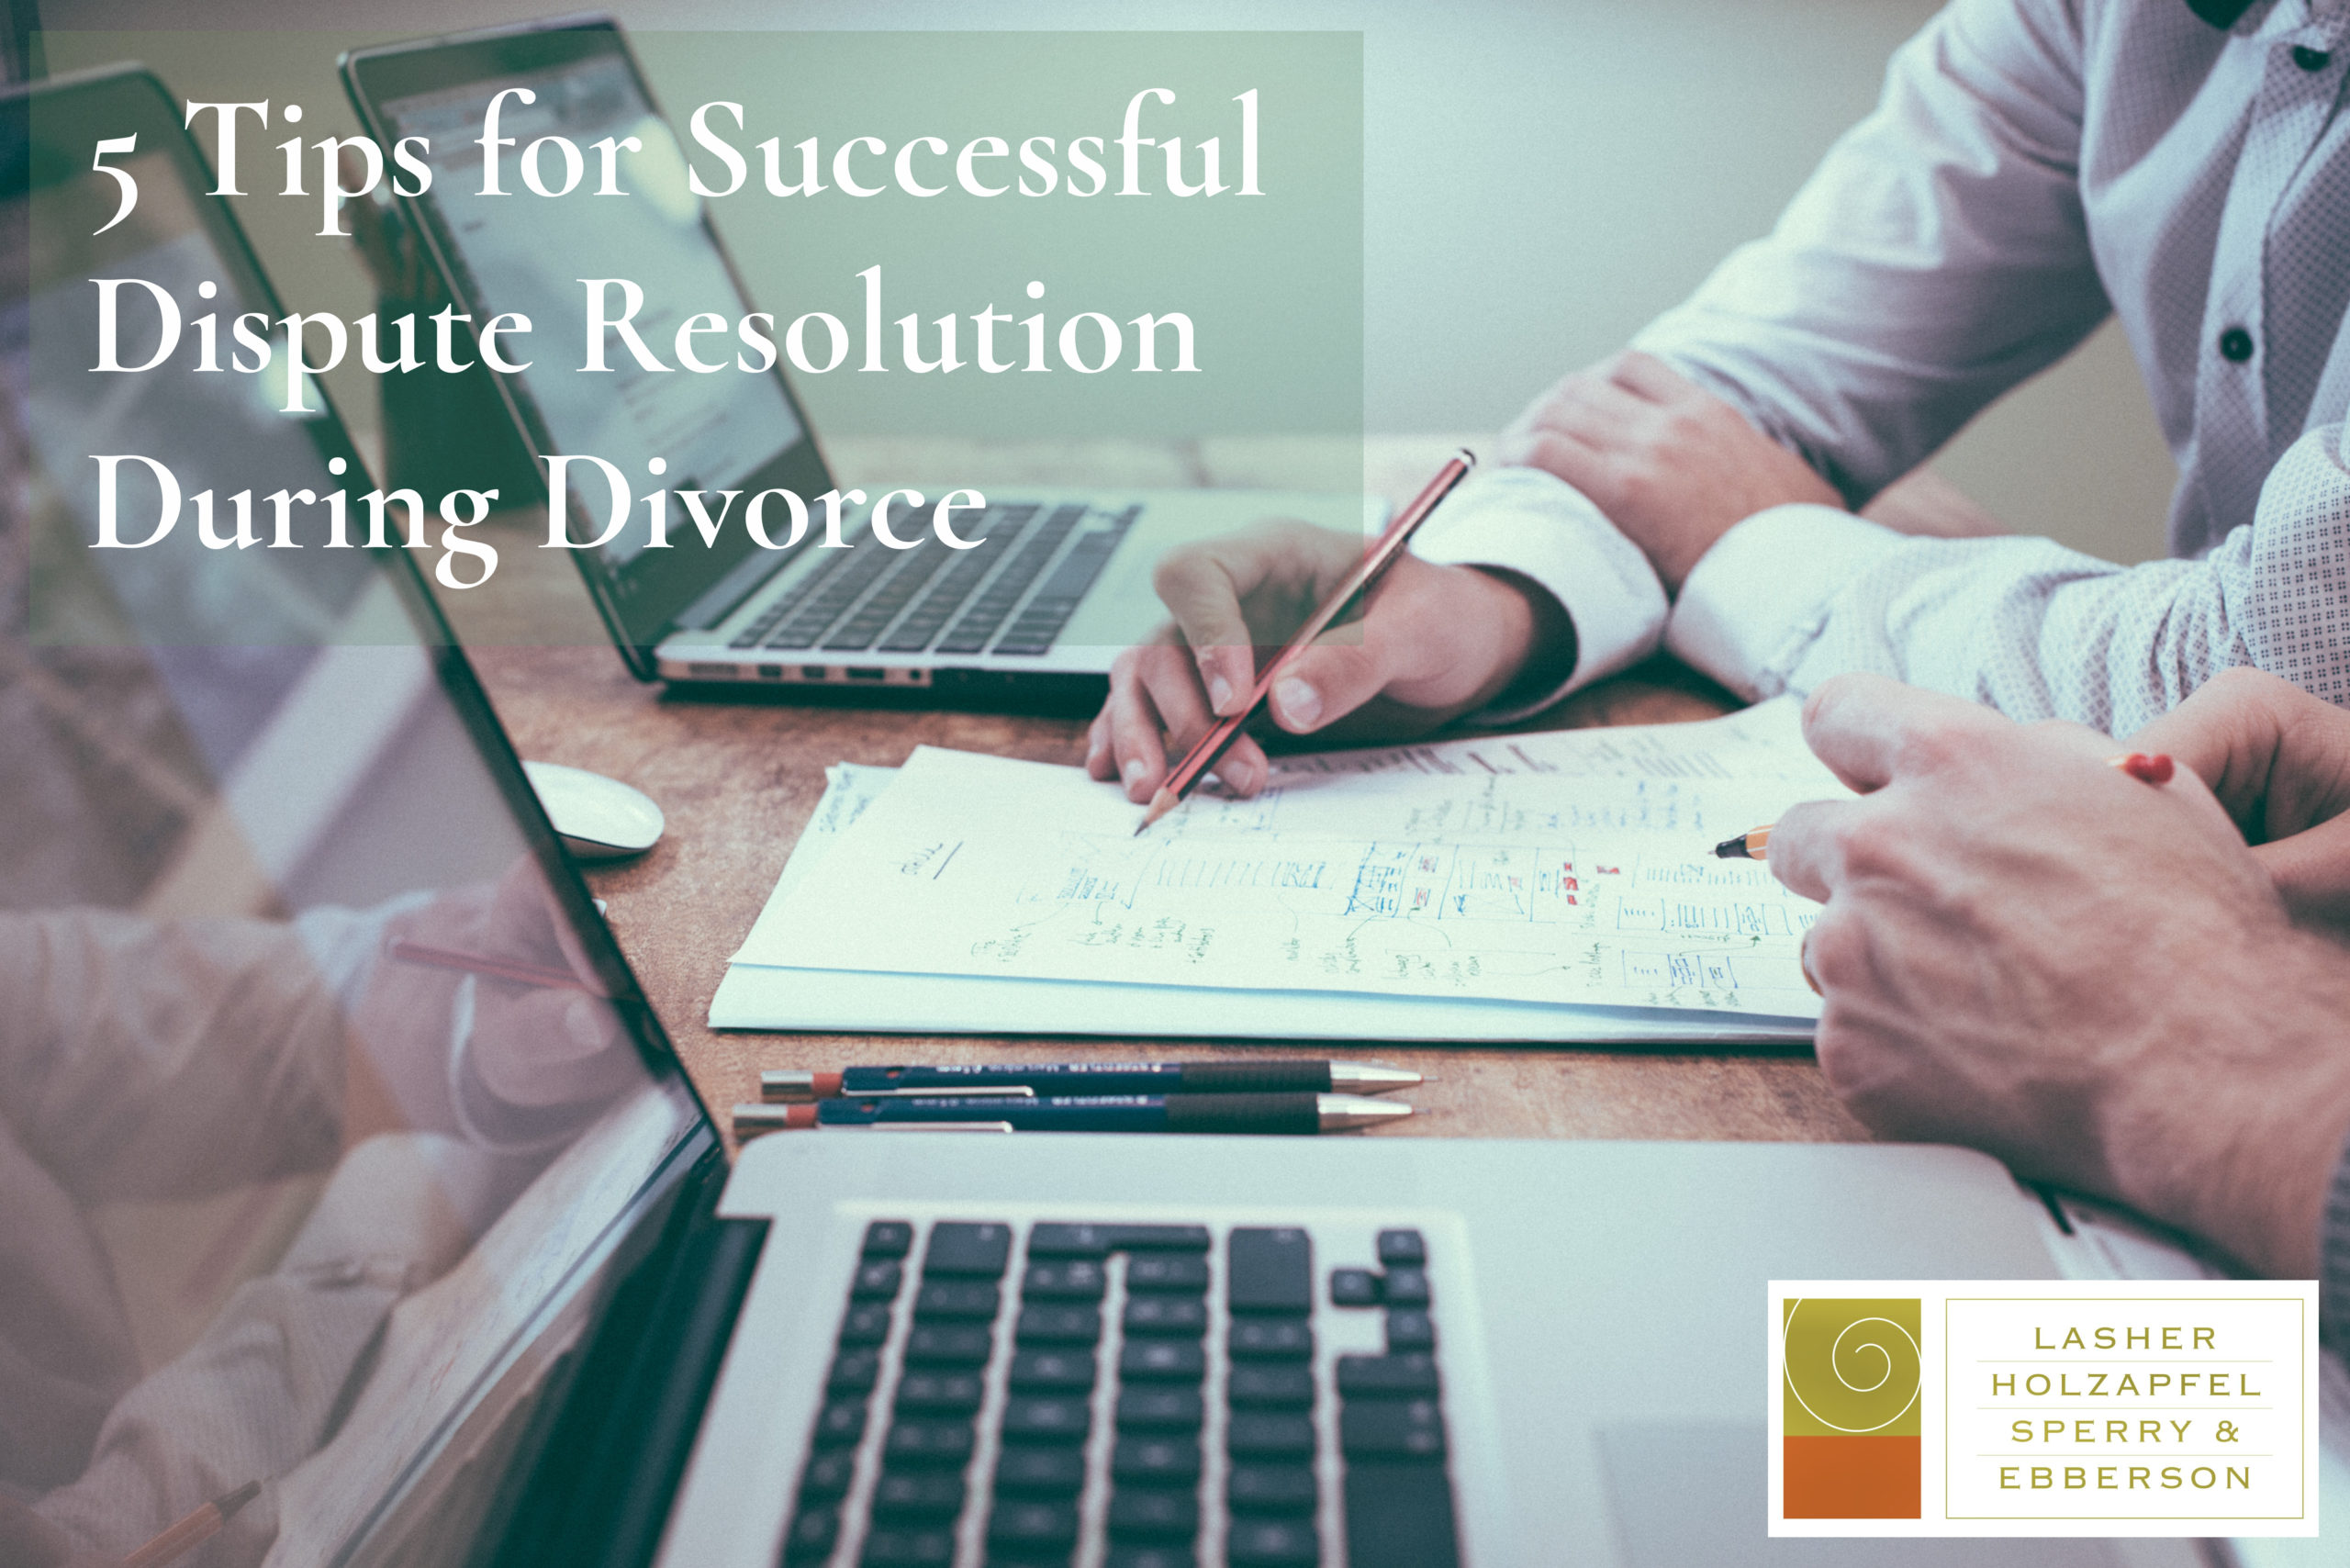 5 Tips for Successful Dispute Resolution During Divorce